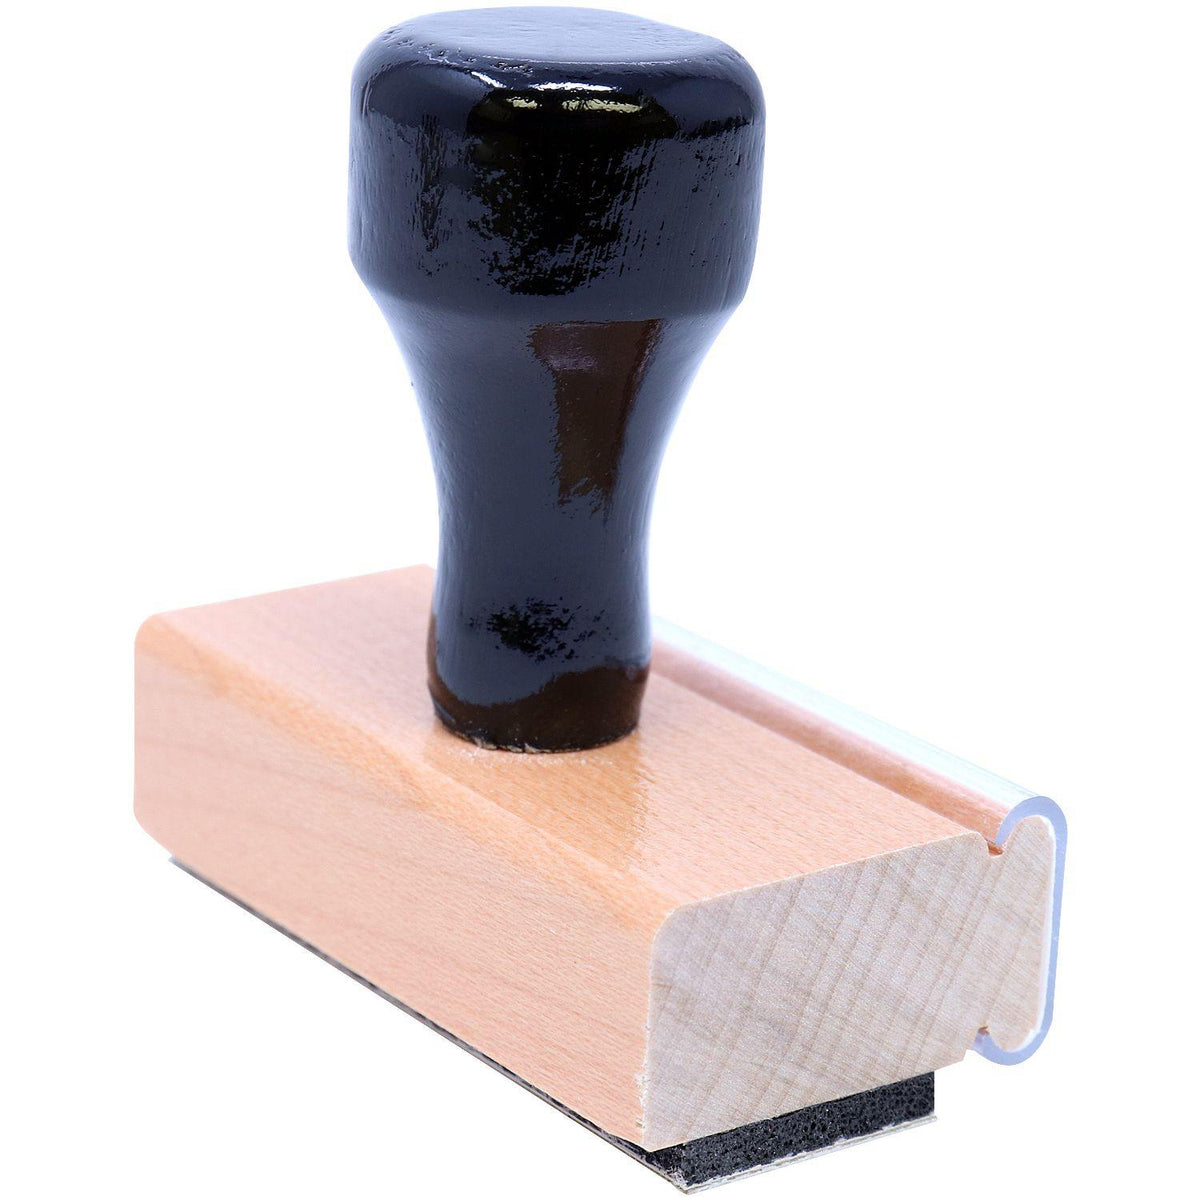 Recibido Rubber Stamp - Engineer Seal Stamps - Brand_Acorn, Impression Size_Small, Stamp Type_Regular Stamp, Type of Use_Office, Type of Use_Postal &amp; Mailing, Type of Use_Shipping &amp; Receiving